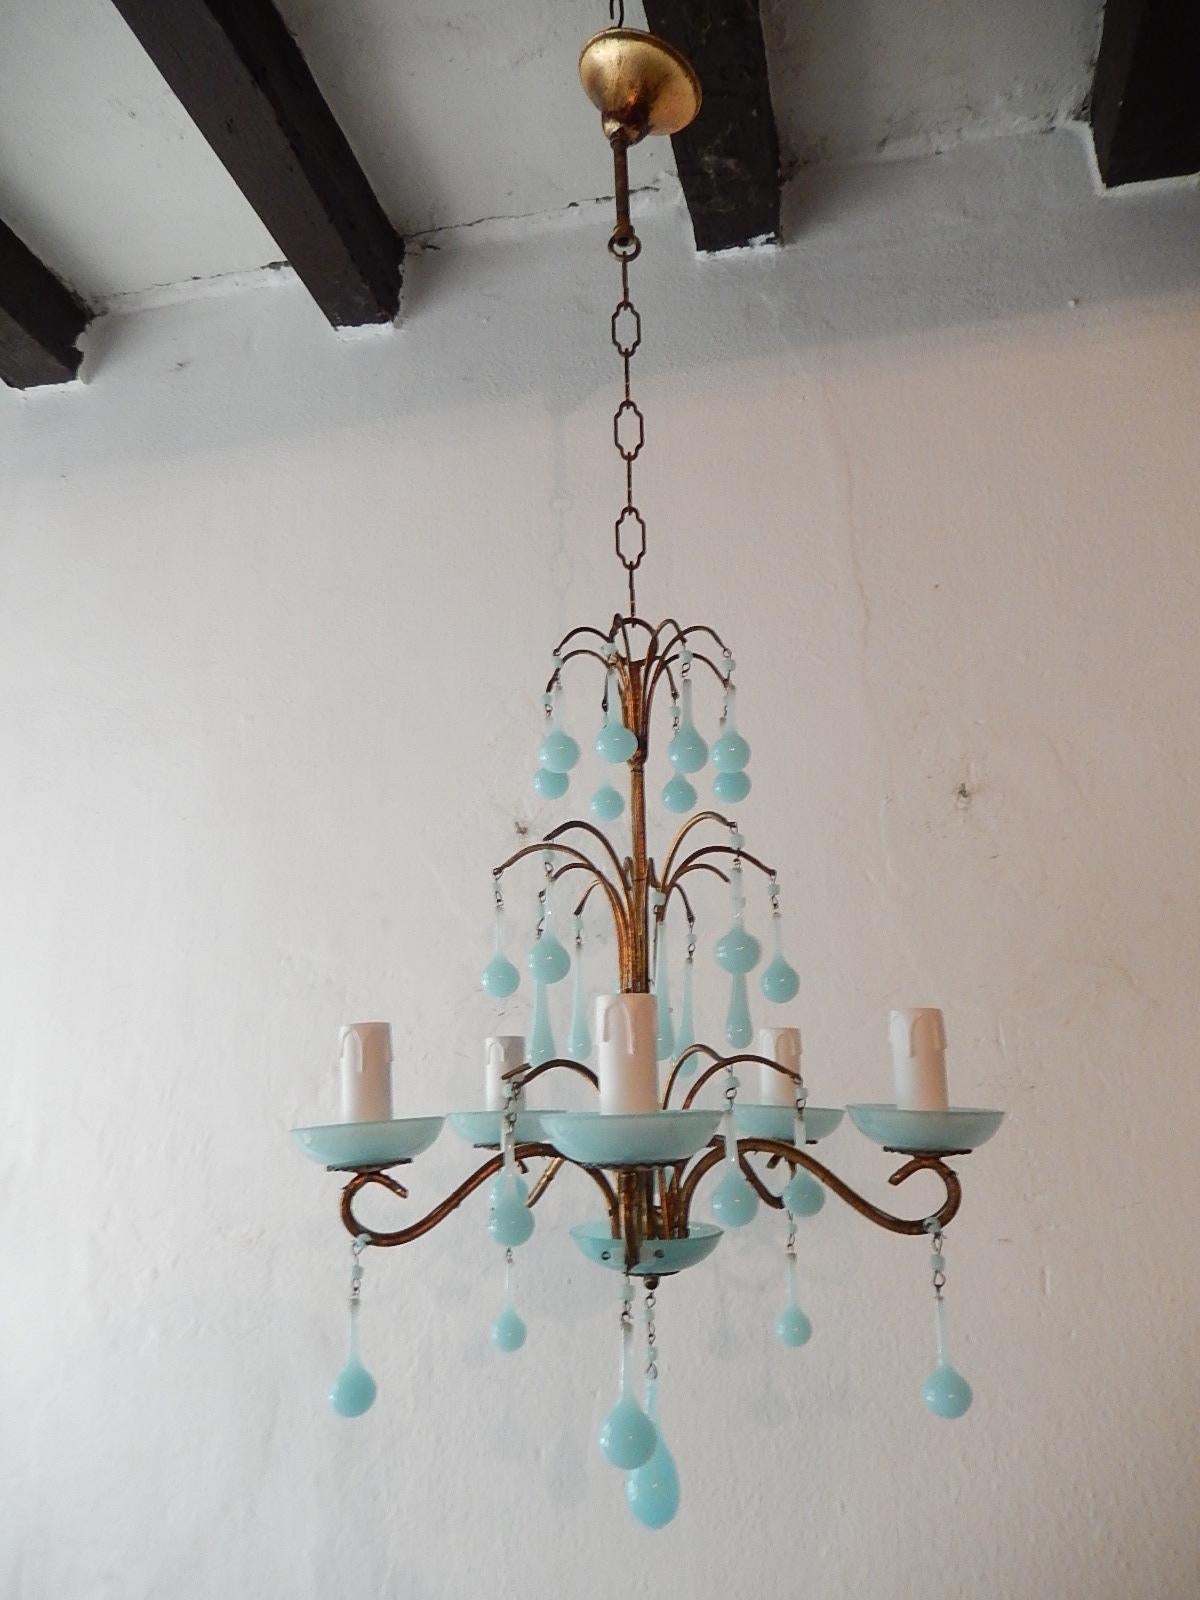 Housing five lights sitting in blue opaline bobeches. Rewired and ready to hang. Gilt metal. Murano blue opaline drops and beads. Adding another 16 inches of original chain and canopy. Free priority shipping from Italy.